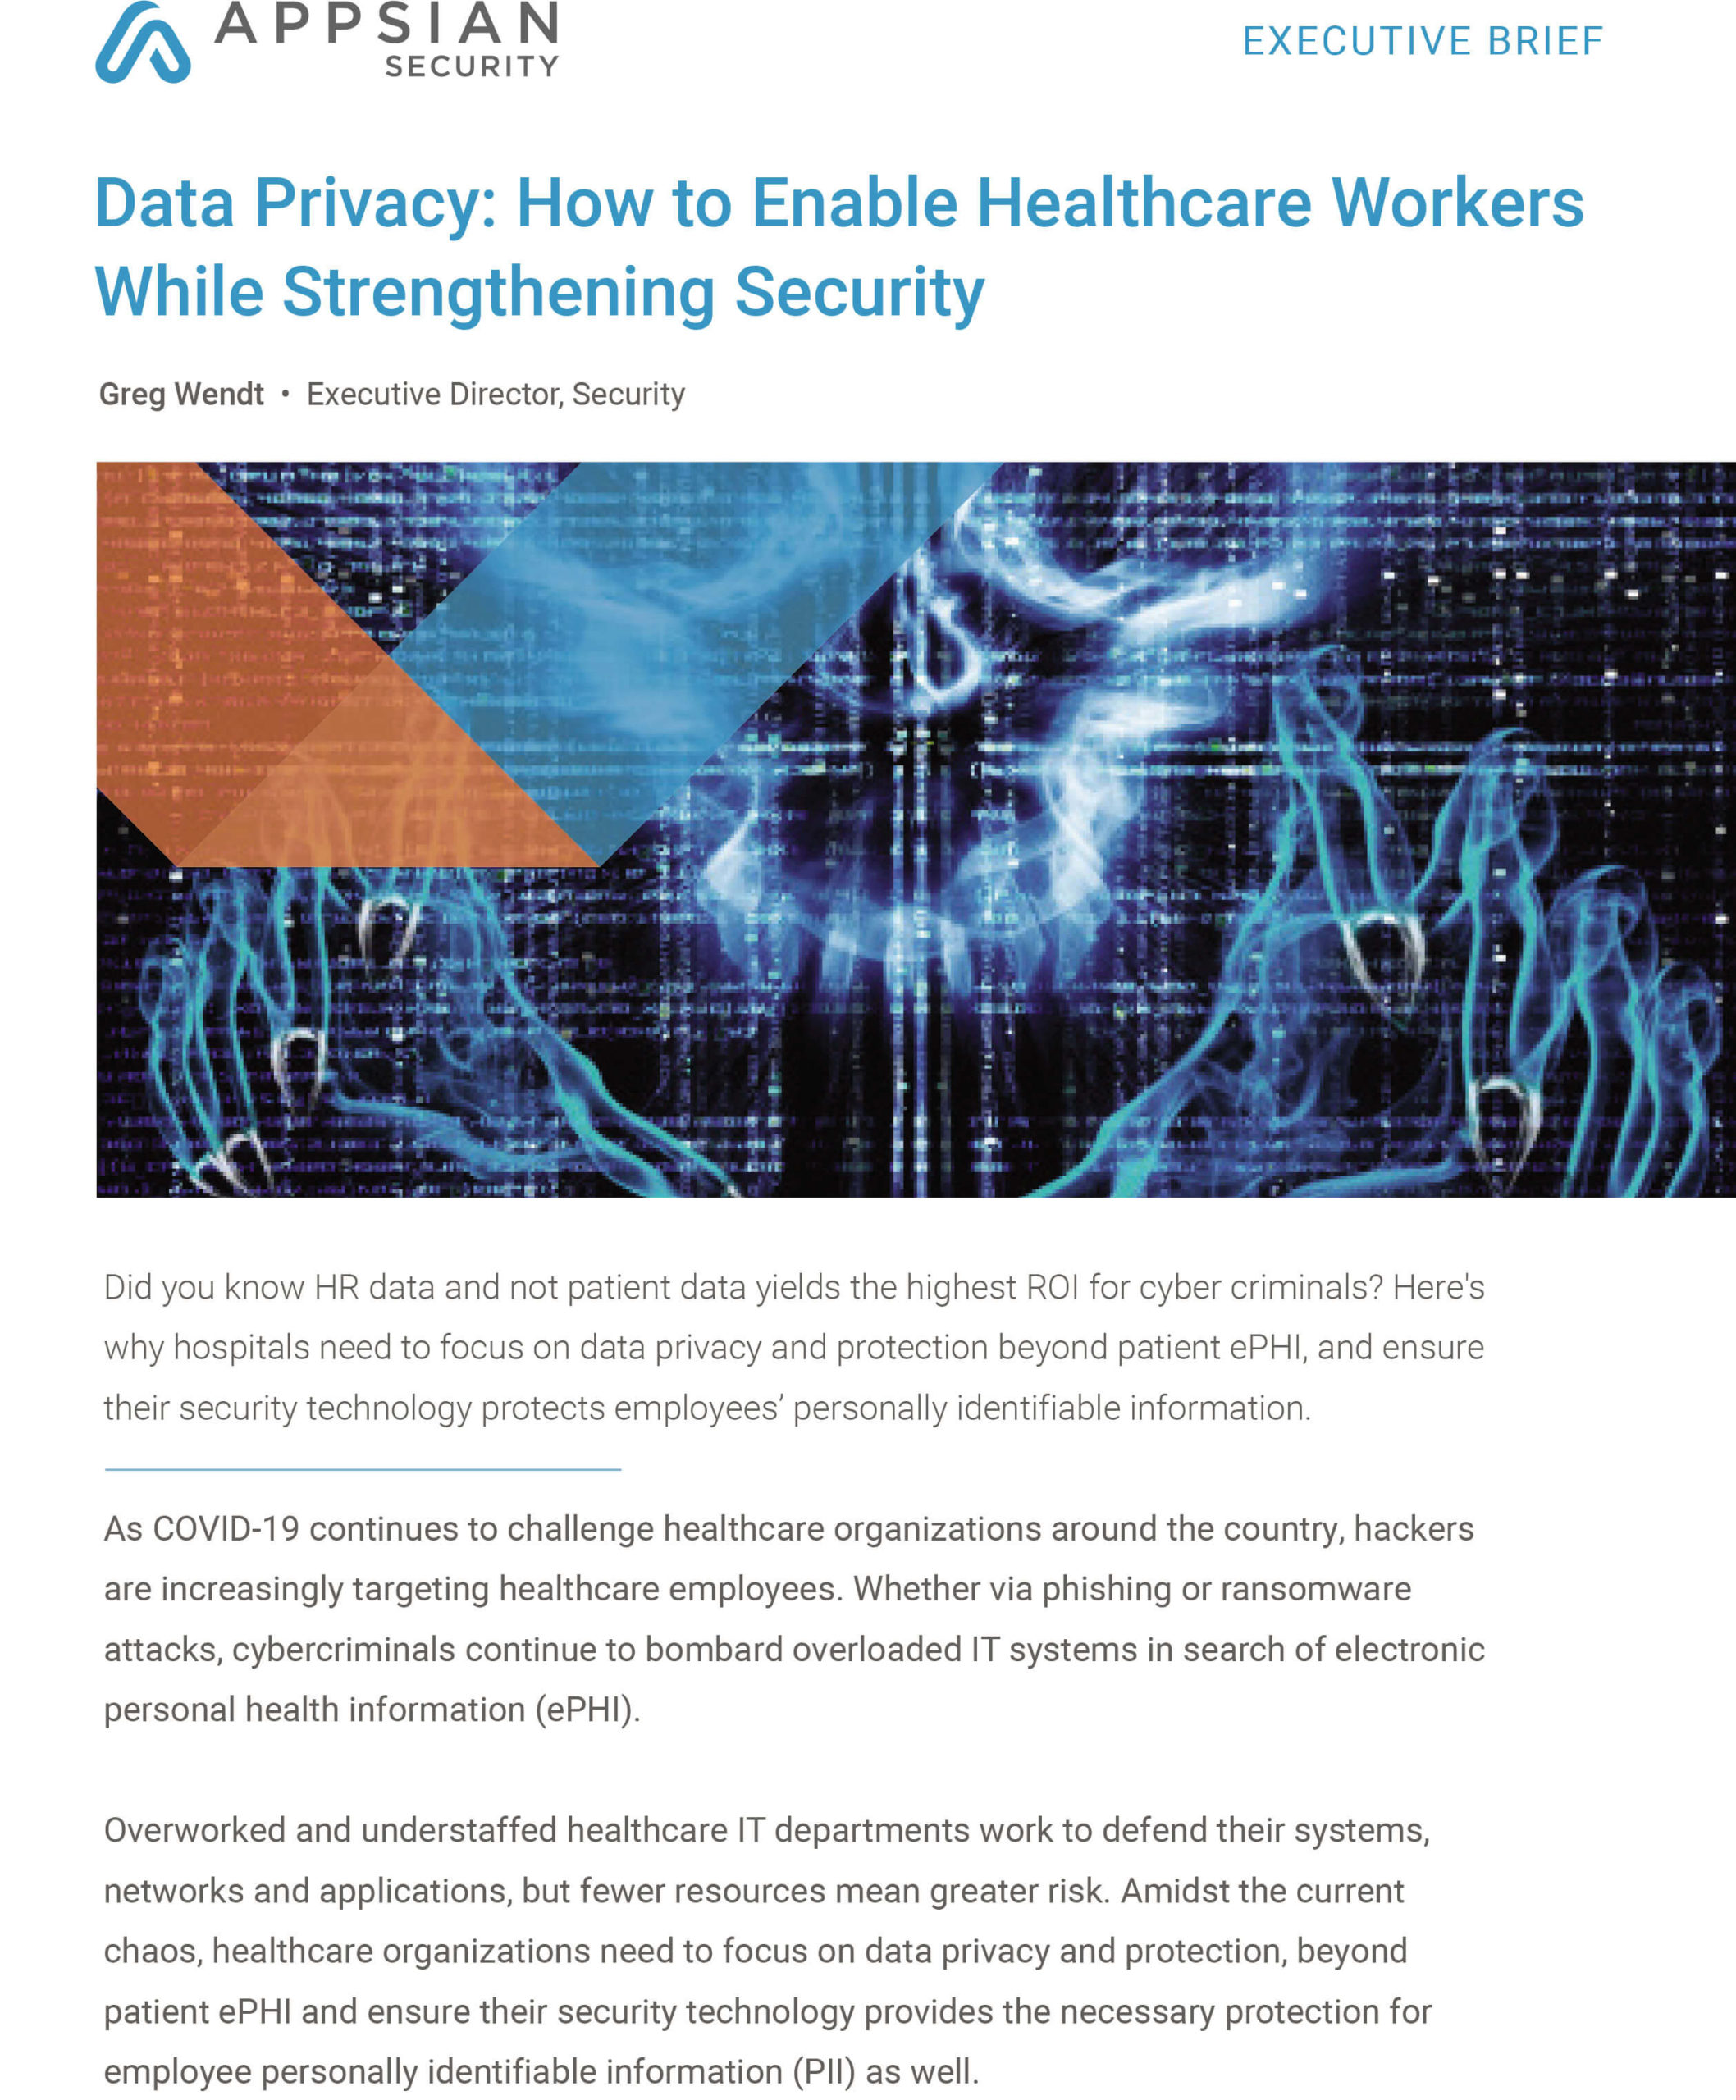 Data Privacy: How to Enable Healthcare Workers While Strengthening Security